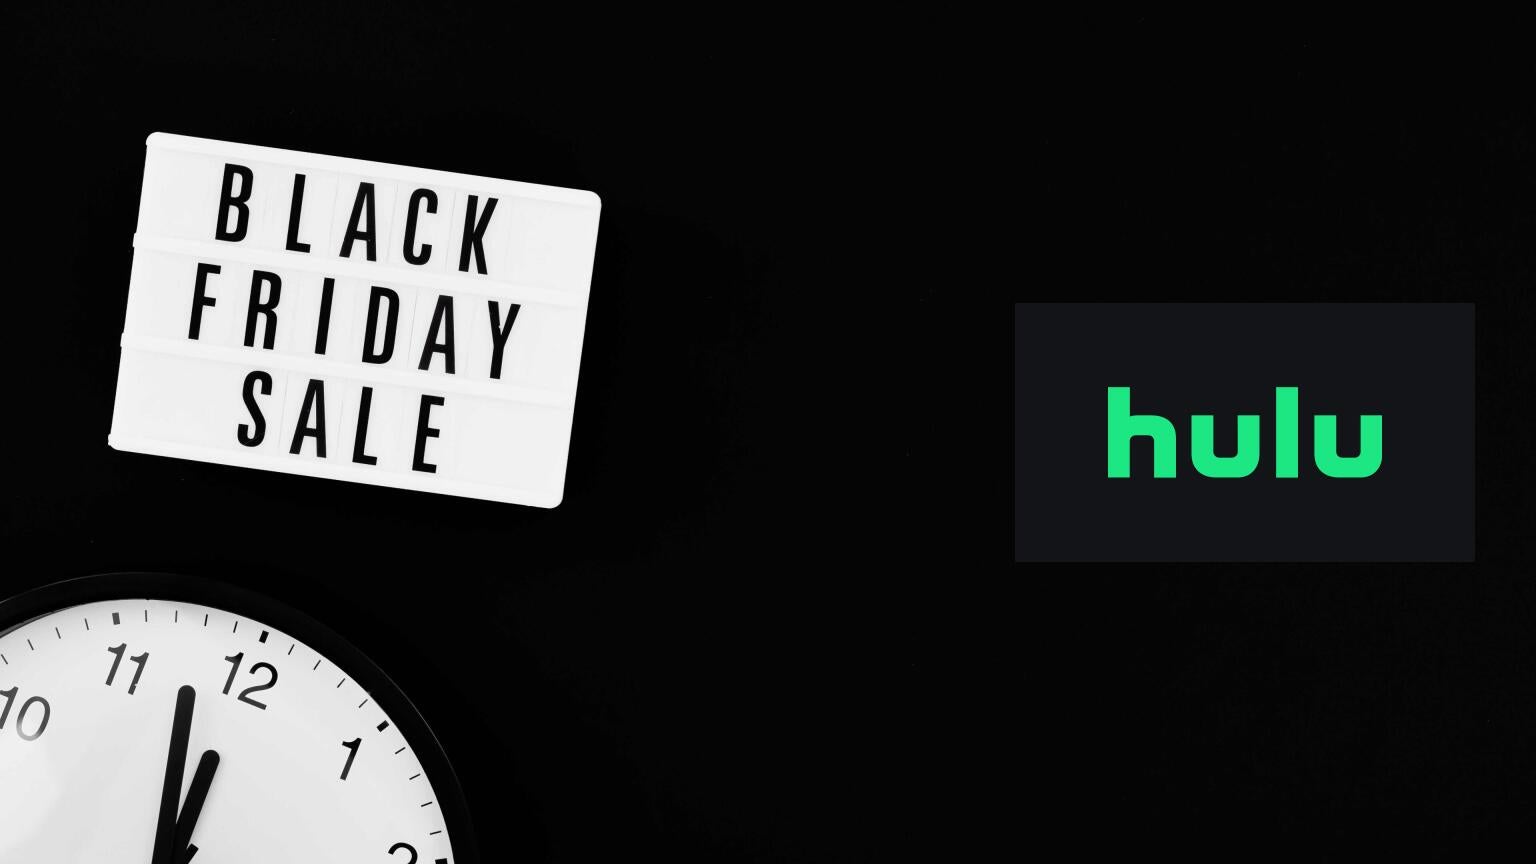 Get a Hulu subscription for $0.99 per month for an entire year.